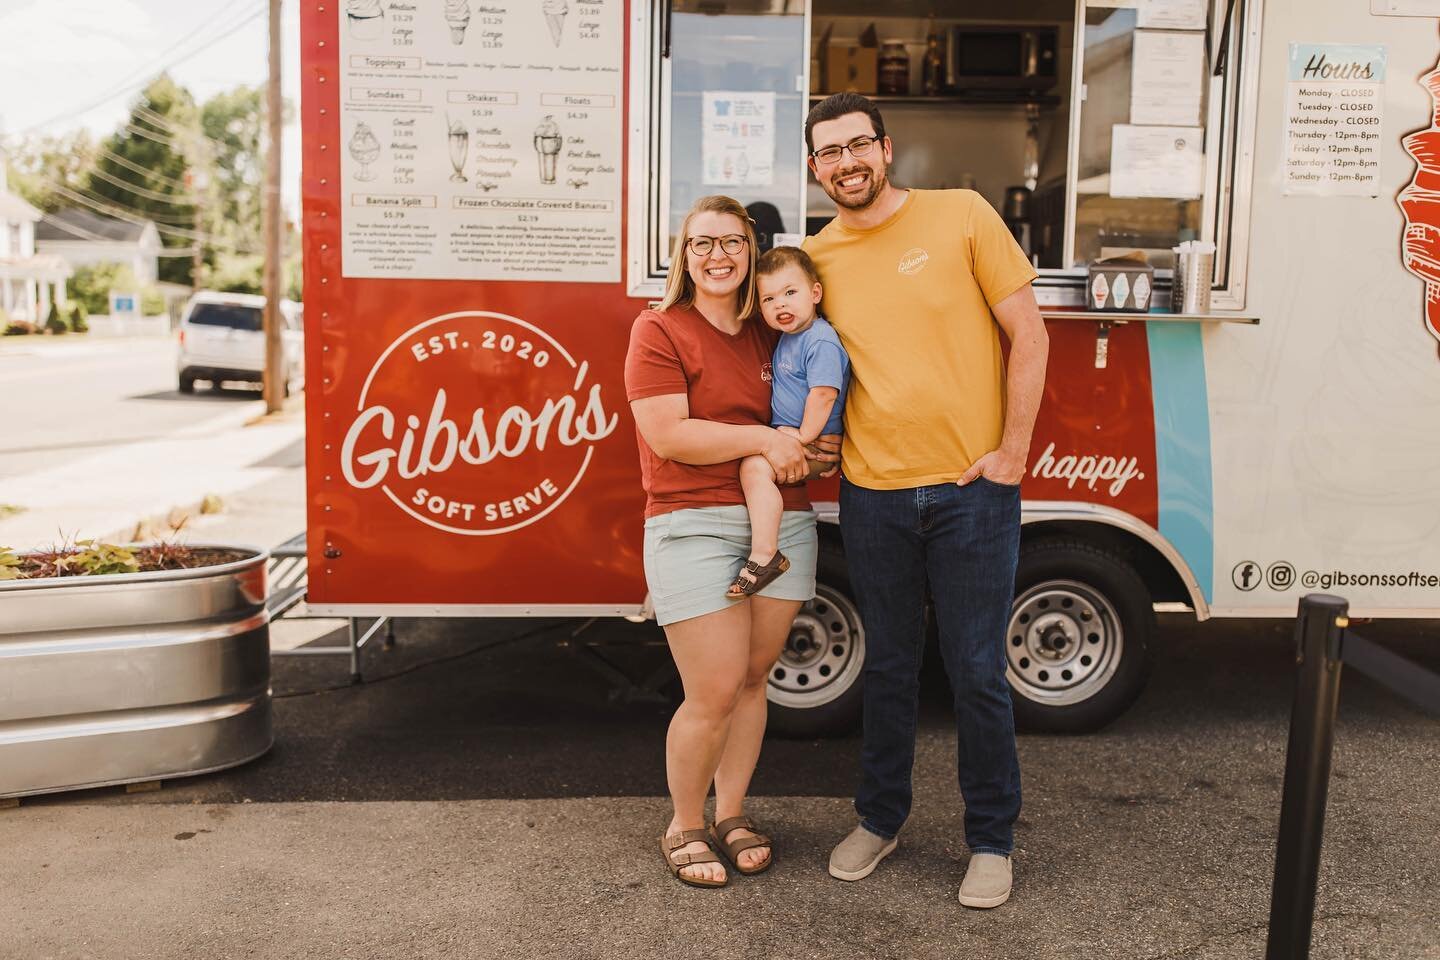 We are overwhelmed once again by your support, excitement, and encouragement of our little business. We never could have dreamed this big when we decided to bring ice cream to Bowling Green. But, in usual BG fashion, you all have showed up - over and